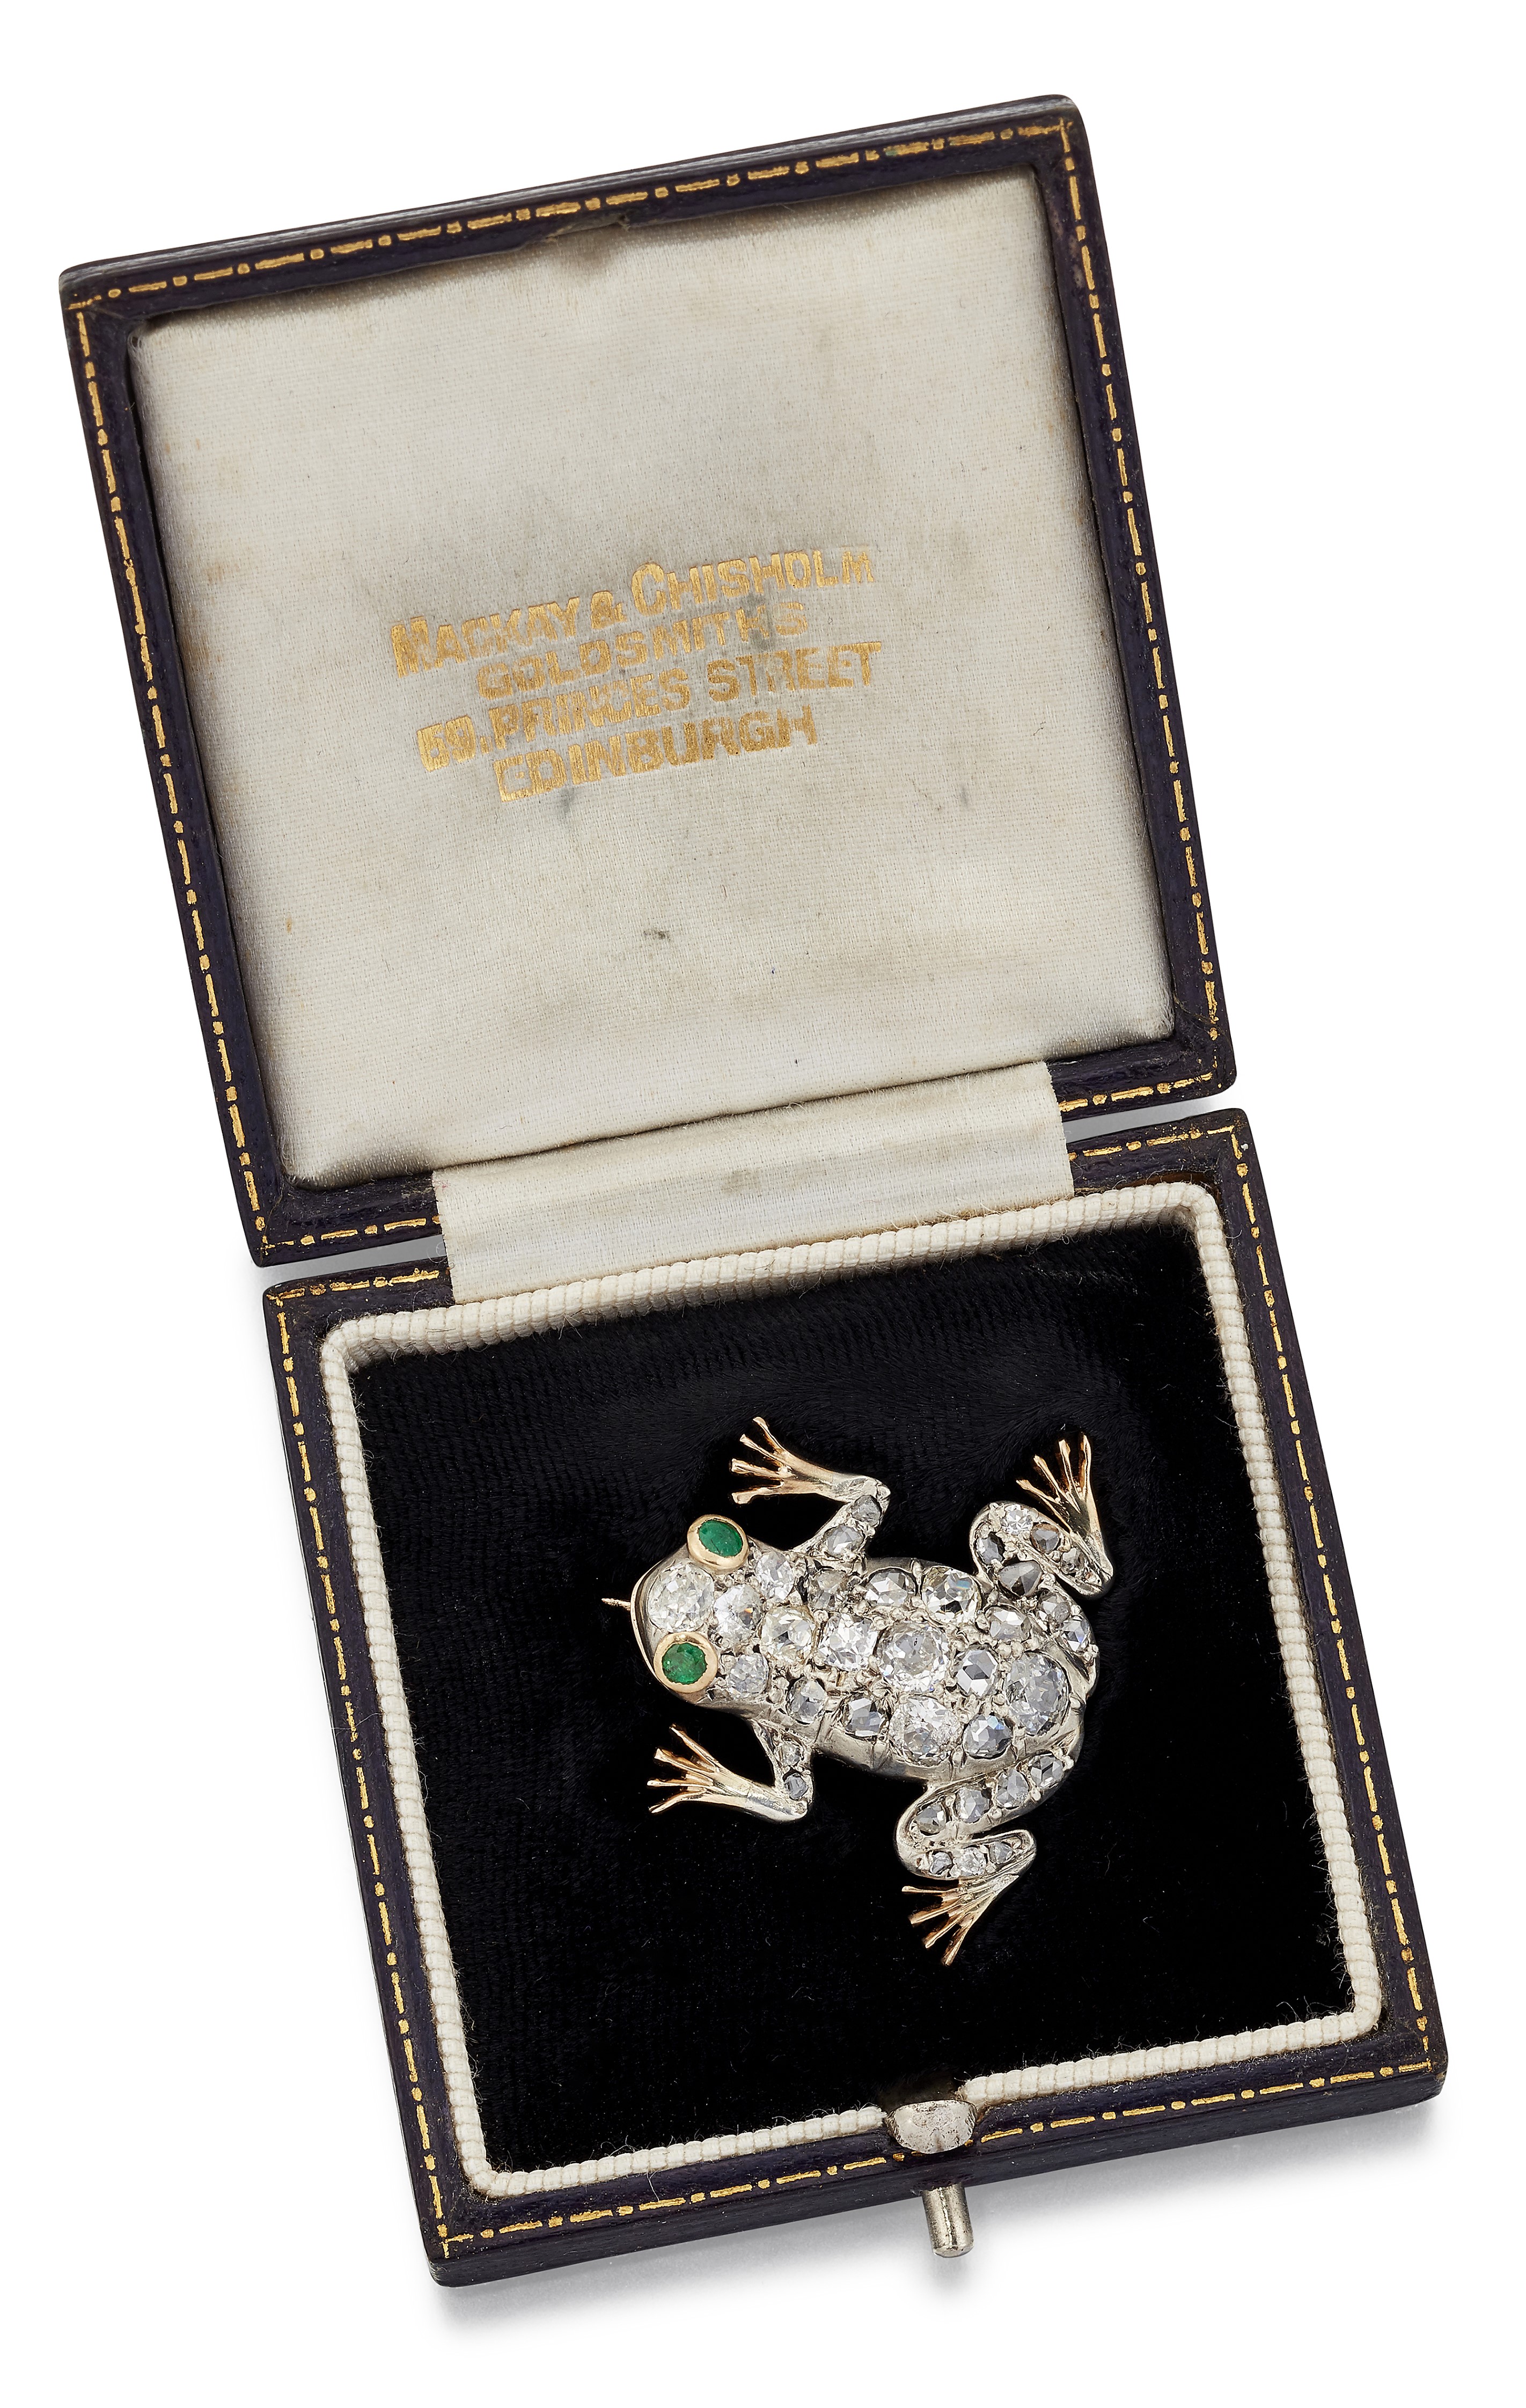 A DIAMOND AND EMERALD NOVELTY FROG BROOCH - Image 2 of 2